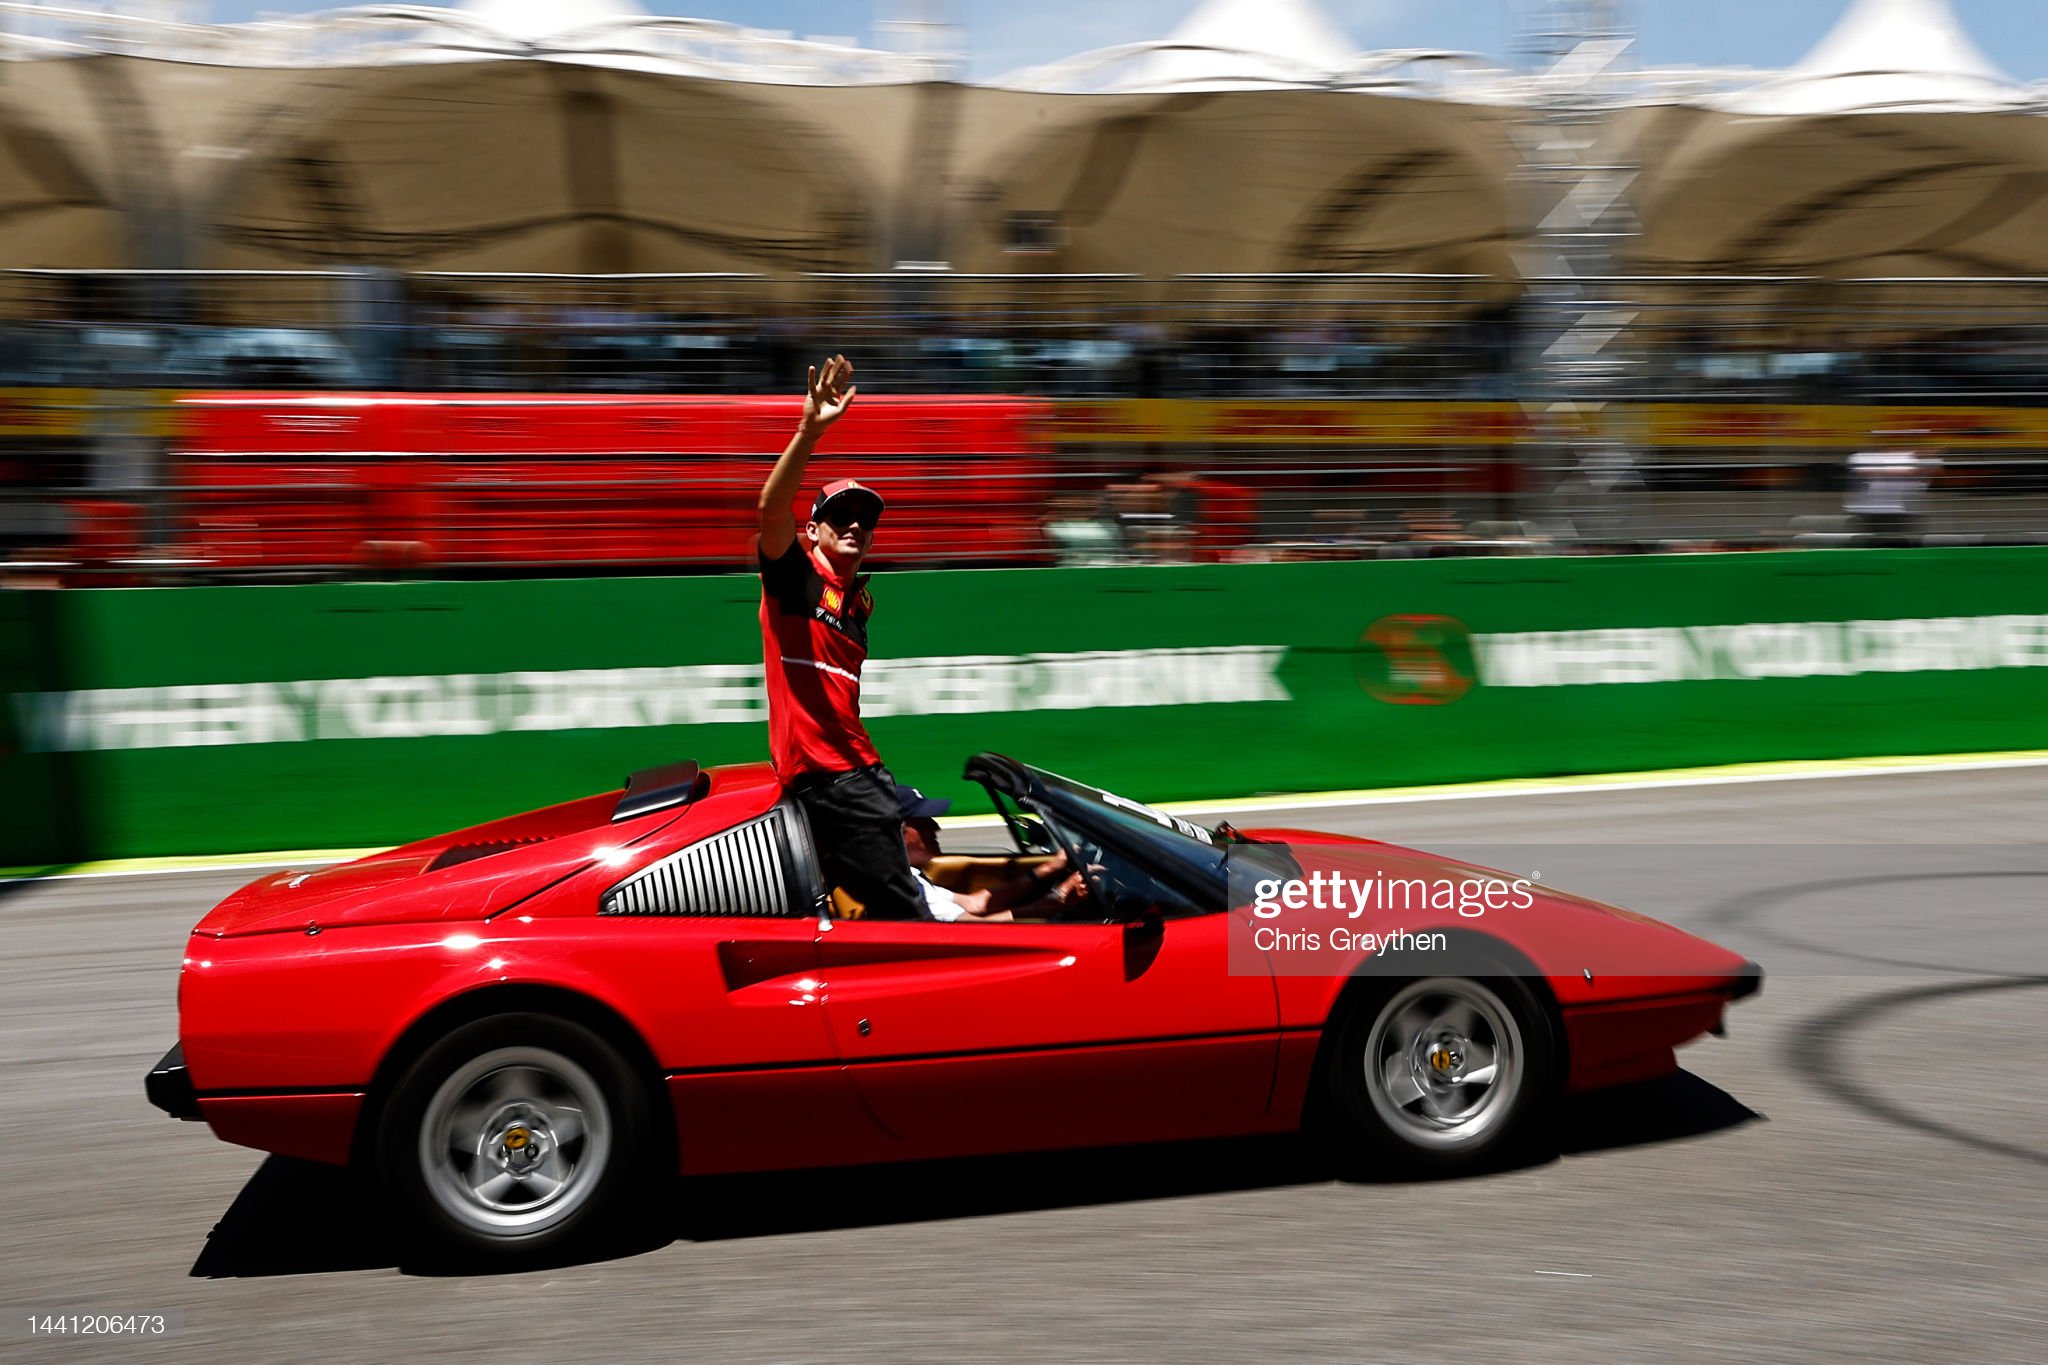 Charles Leclerc of Monaco and Ferrari waves to the crowd on the drivers’ parade prior to the F1 Grand Prix of Brazil.